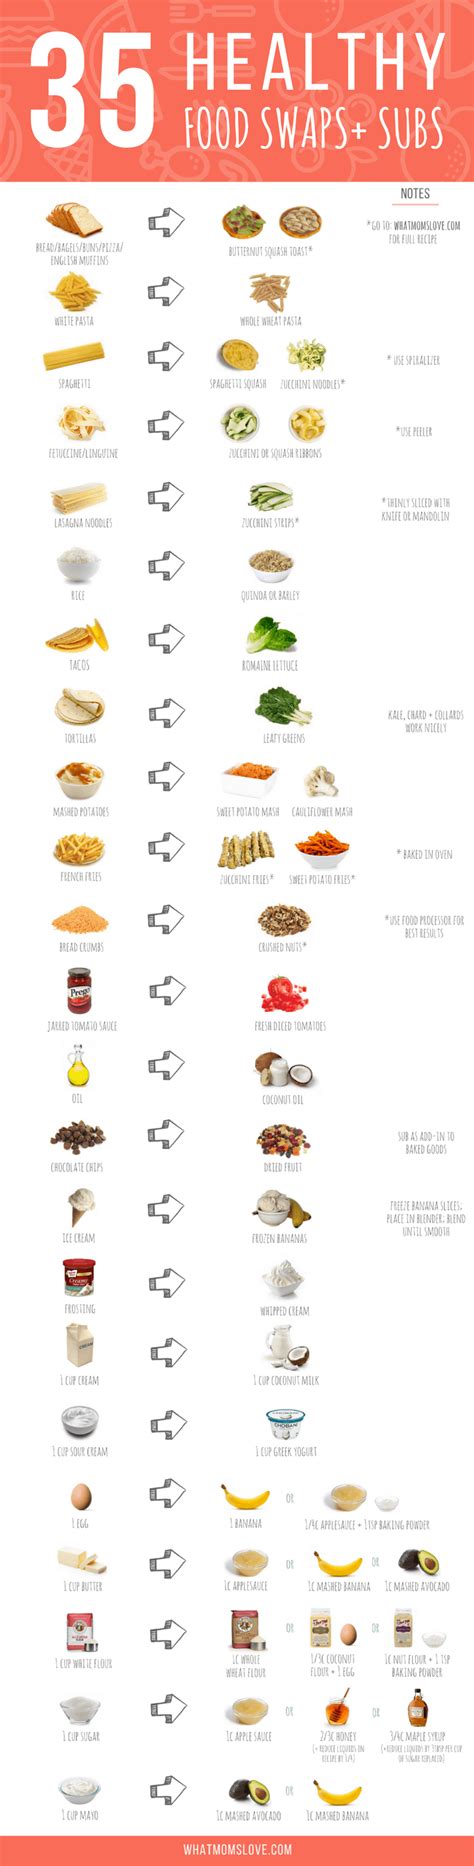 35 Healthy Food Swaps And Substitutions An Easy Cheat Sheet To Help